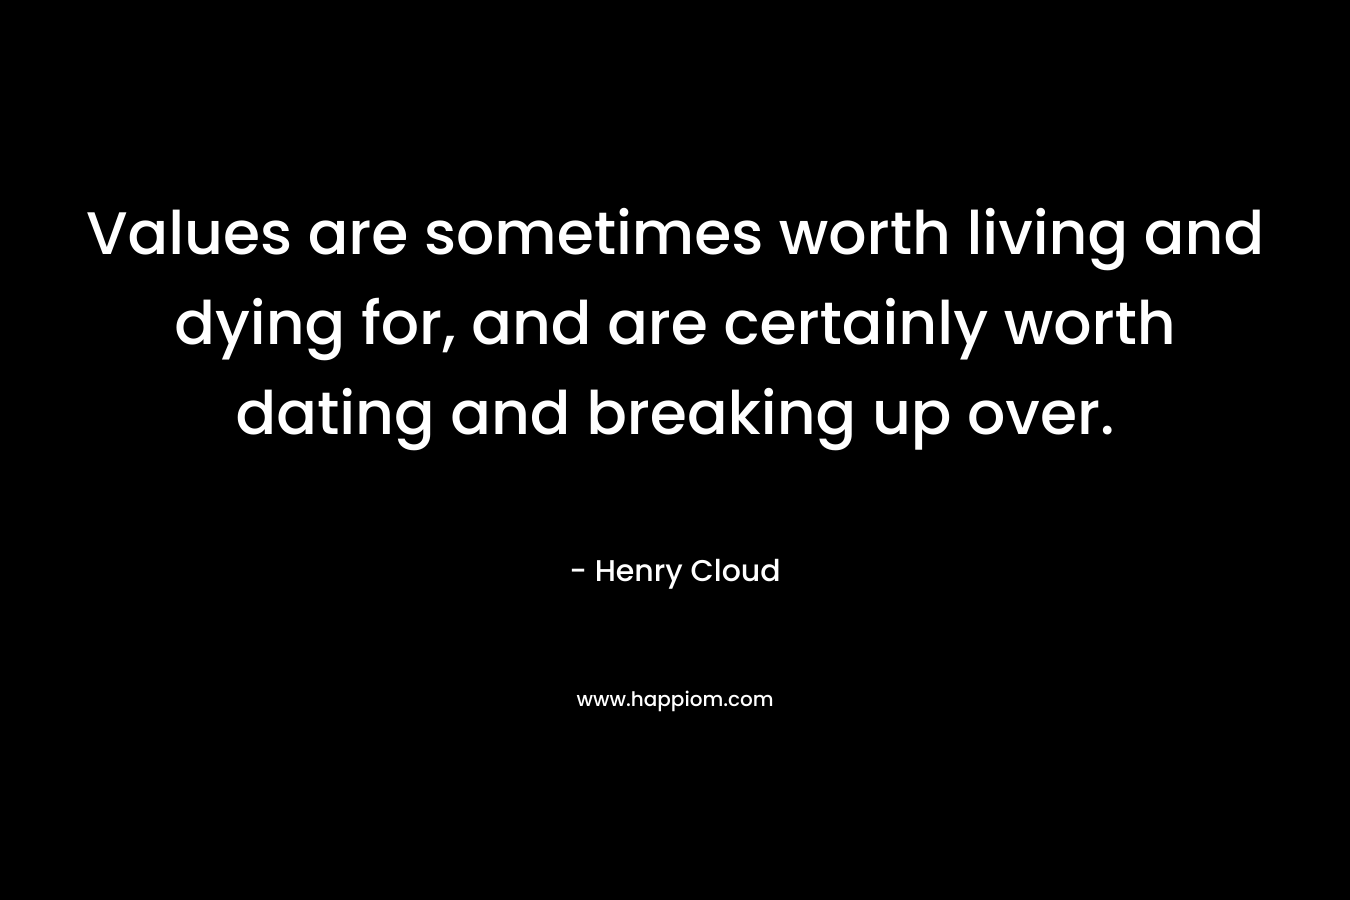 Values are sometimes worth living and dying for, and are certainly worth dating and breaking up over. – Henry Cloud